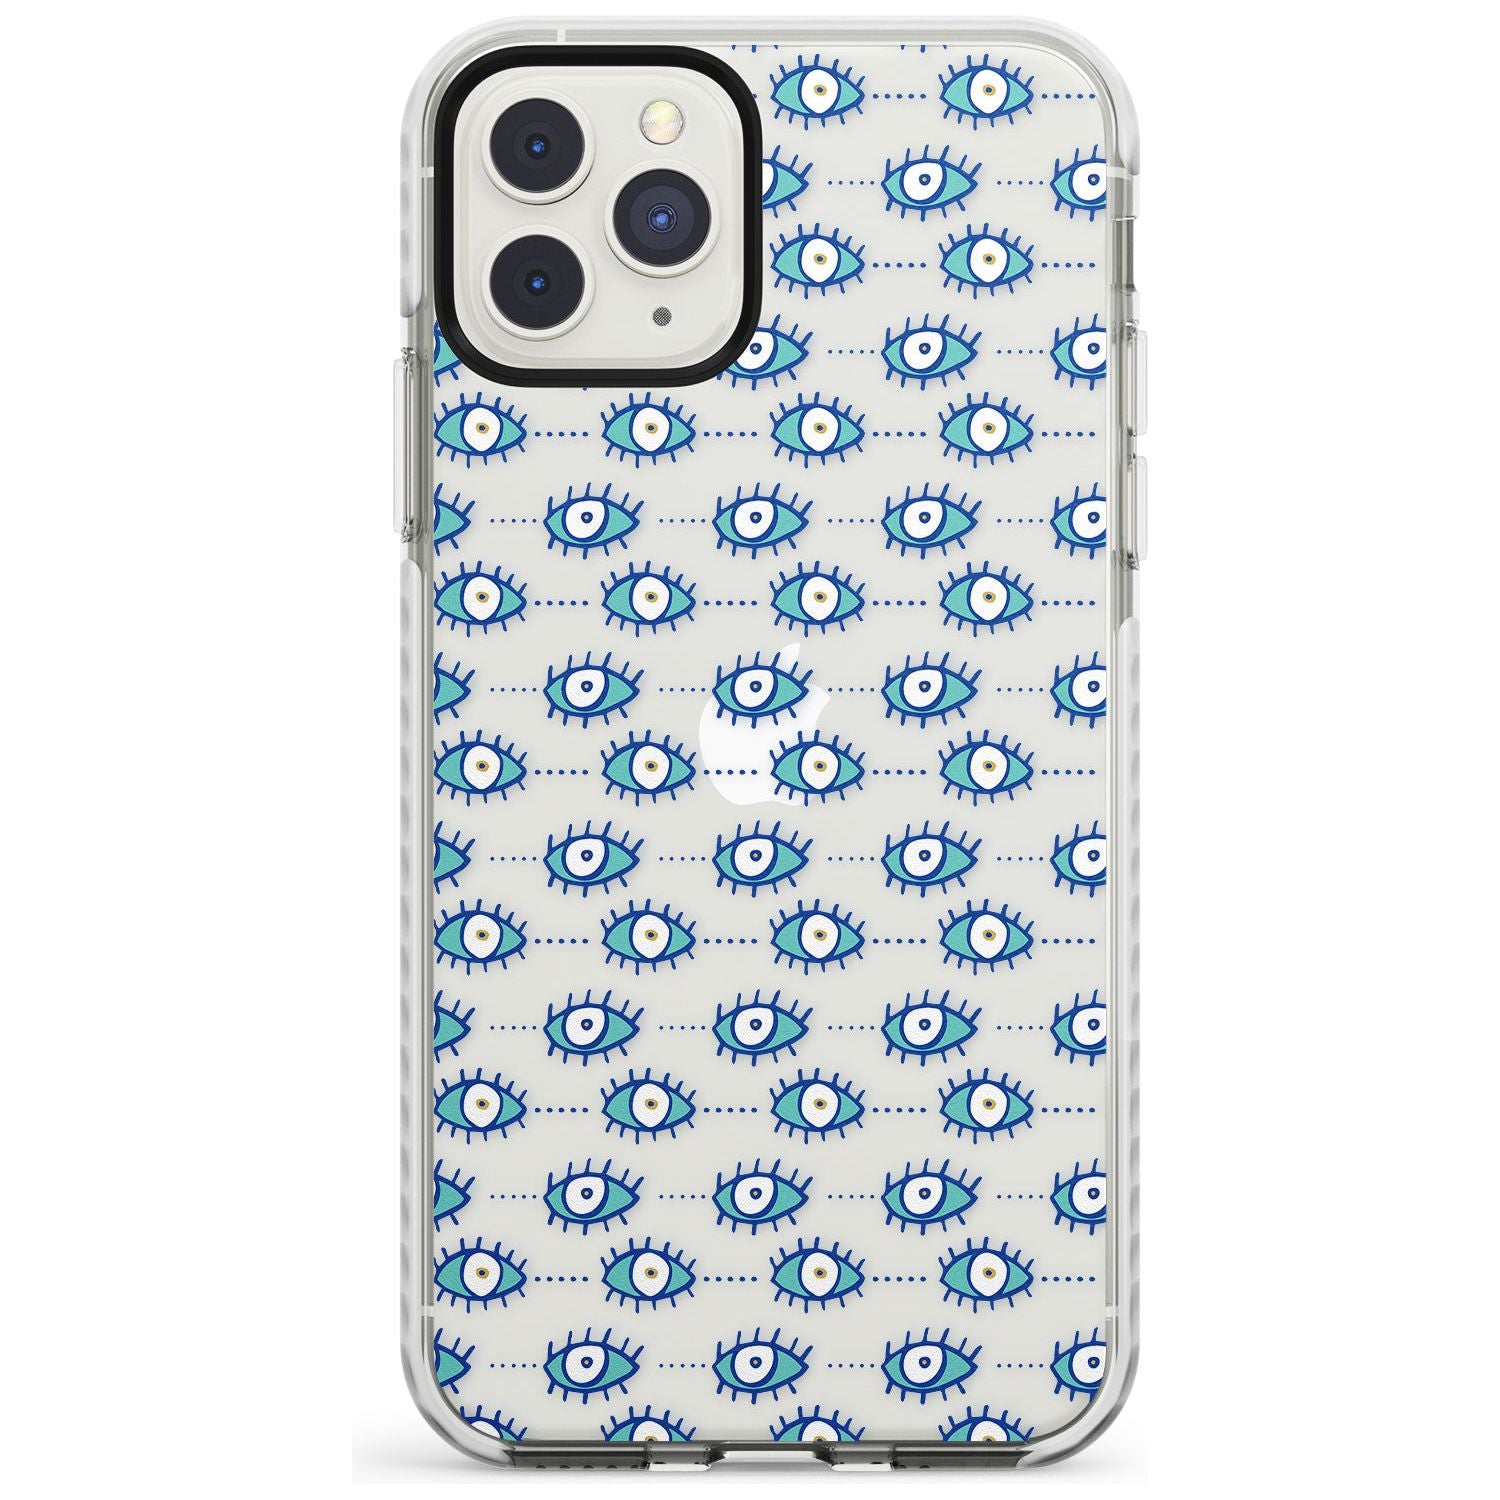 Crazy Eyes (Clear) Psychedelic Eyes Pattern Impact Phone Case for iPhone 11 Pro Max